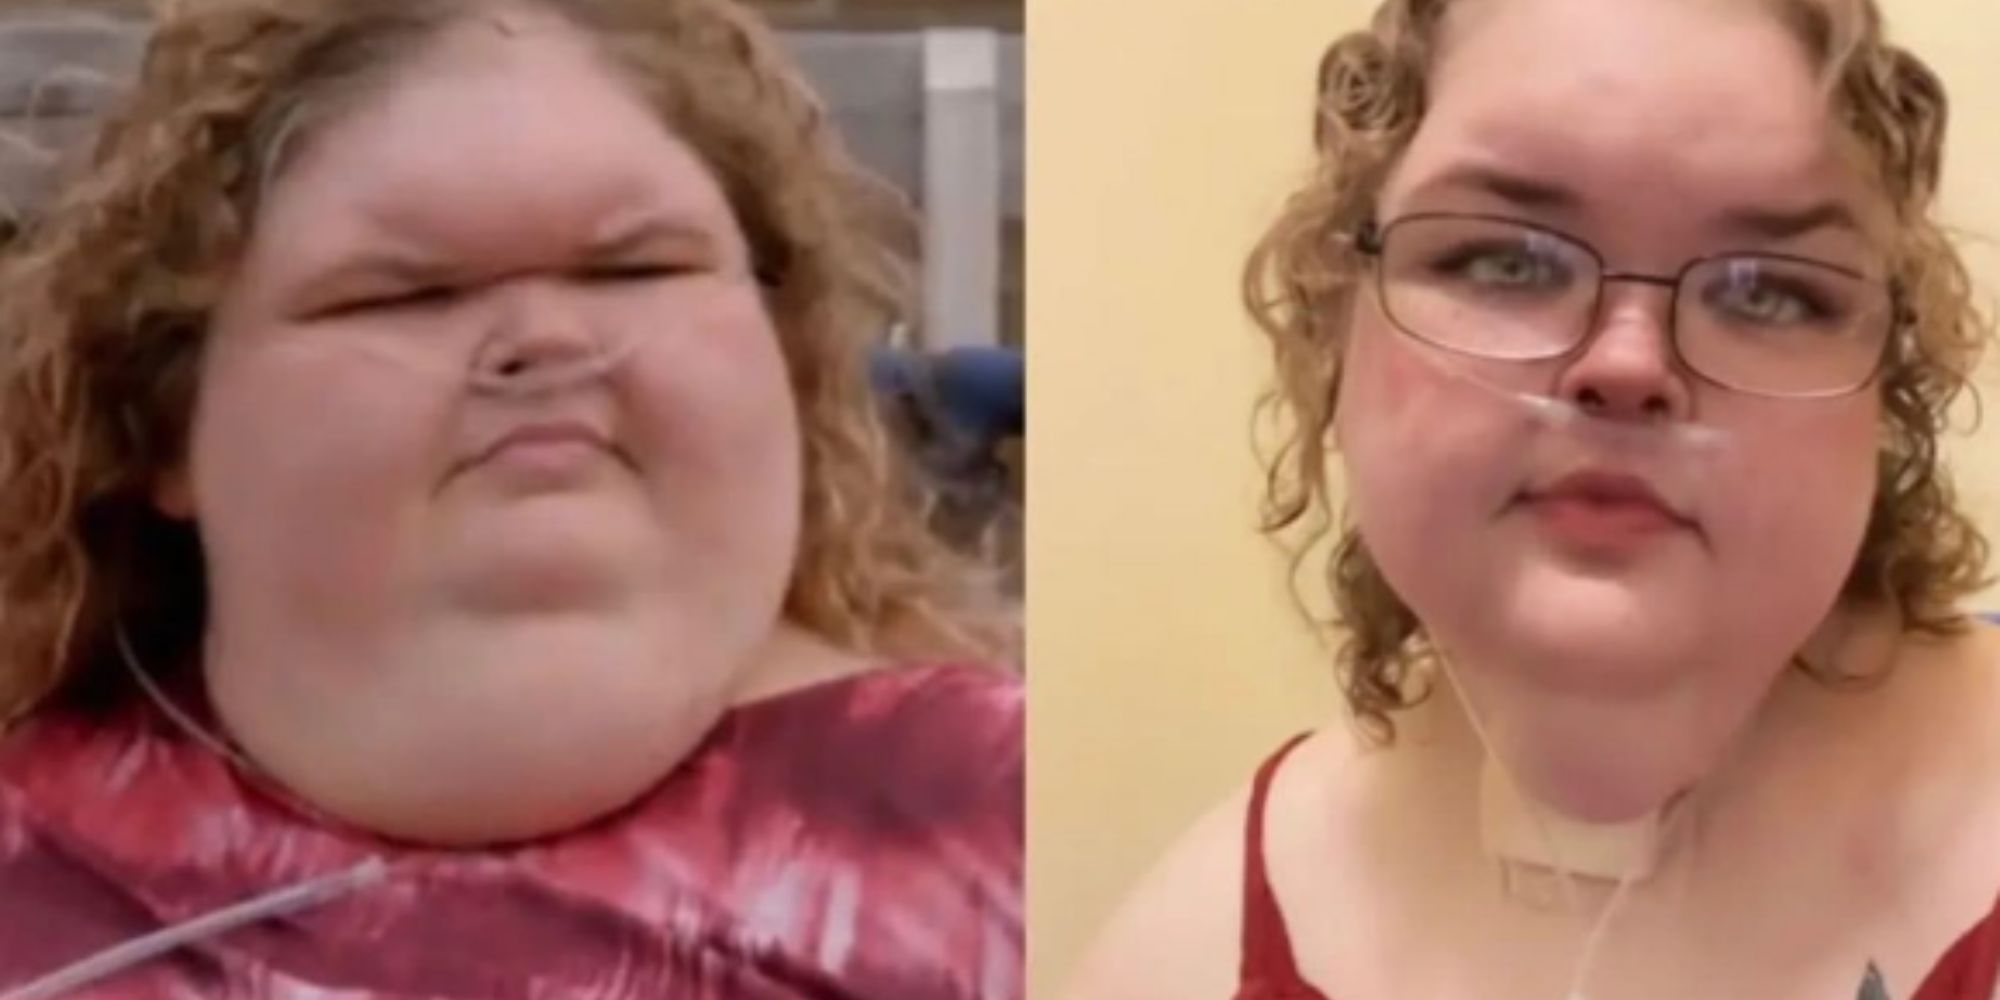 1000-lb sisters tammy slaton wearing red in side-by-side before-and-after weight loss